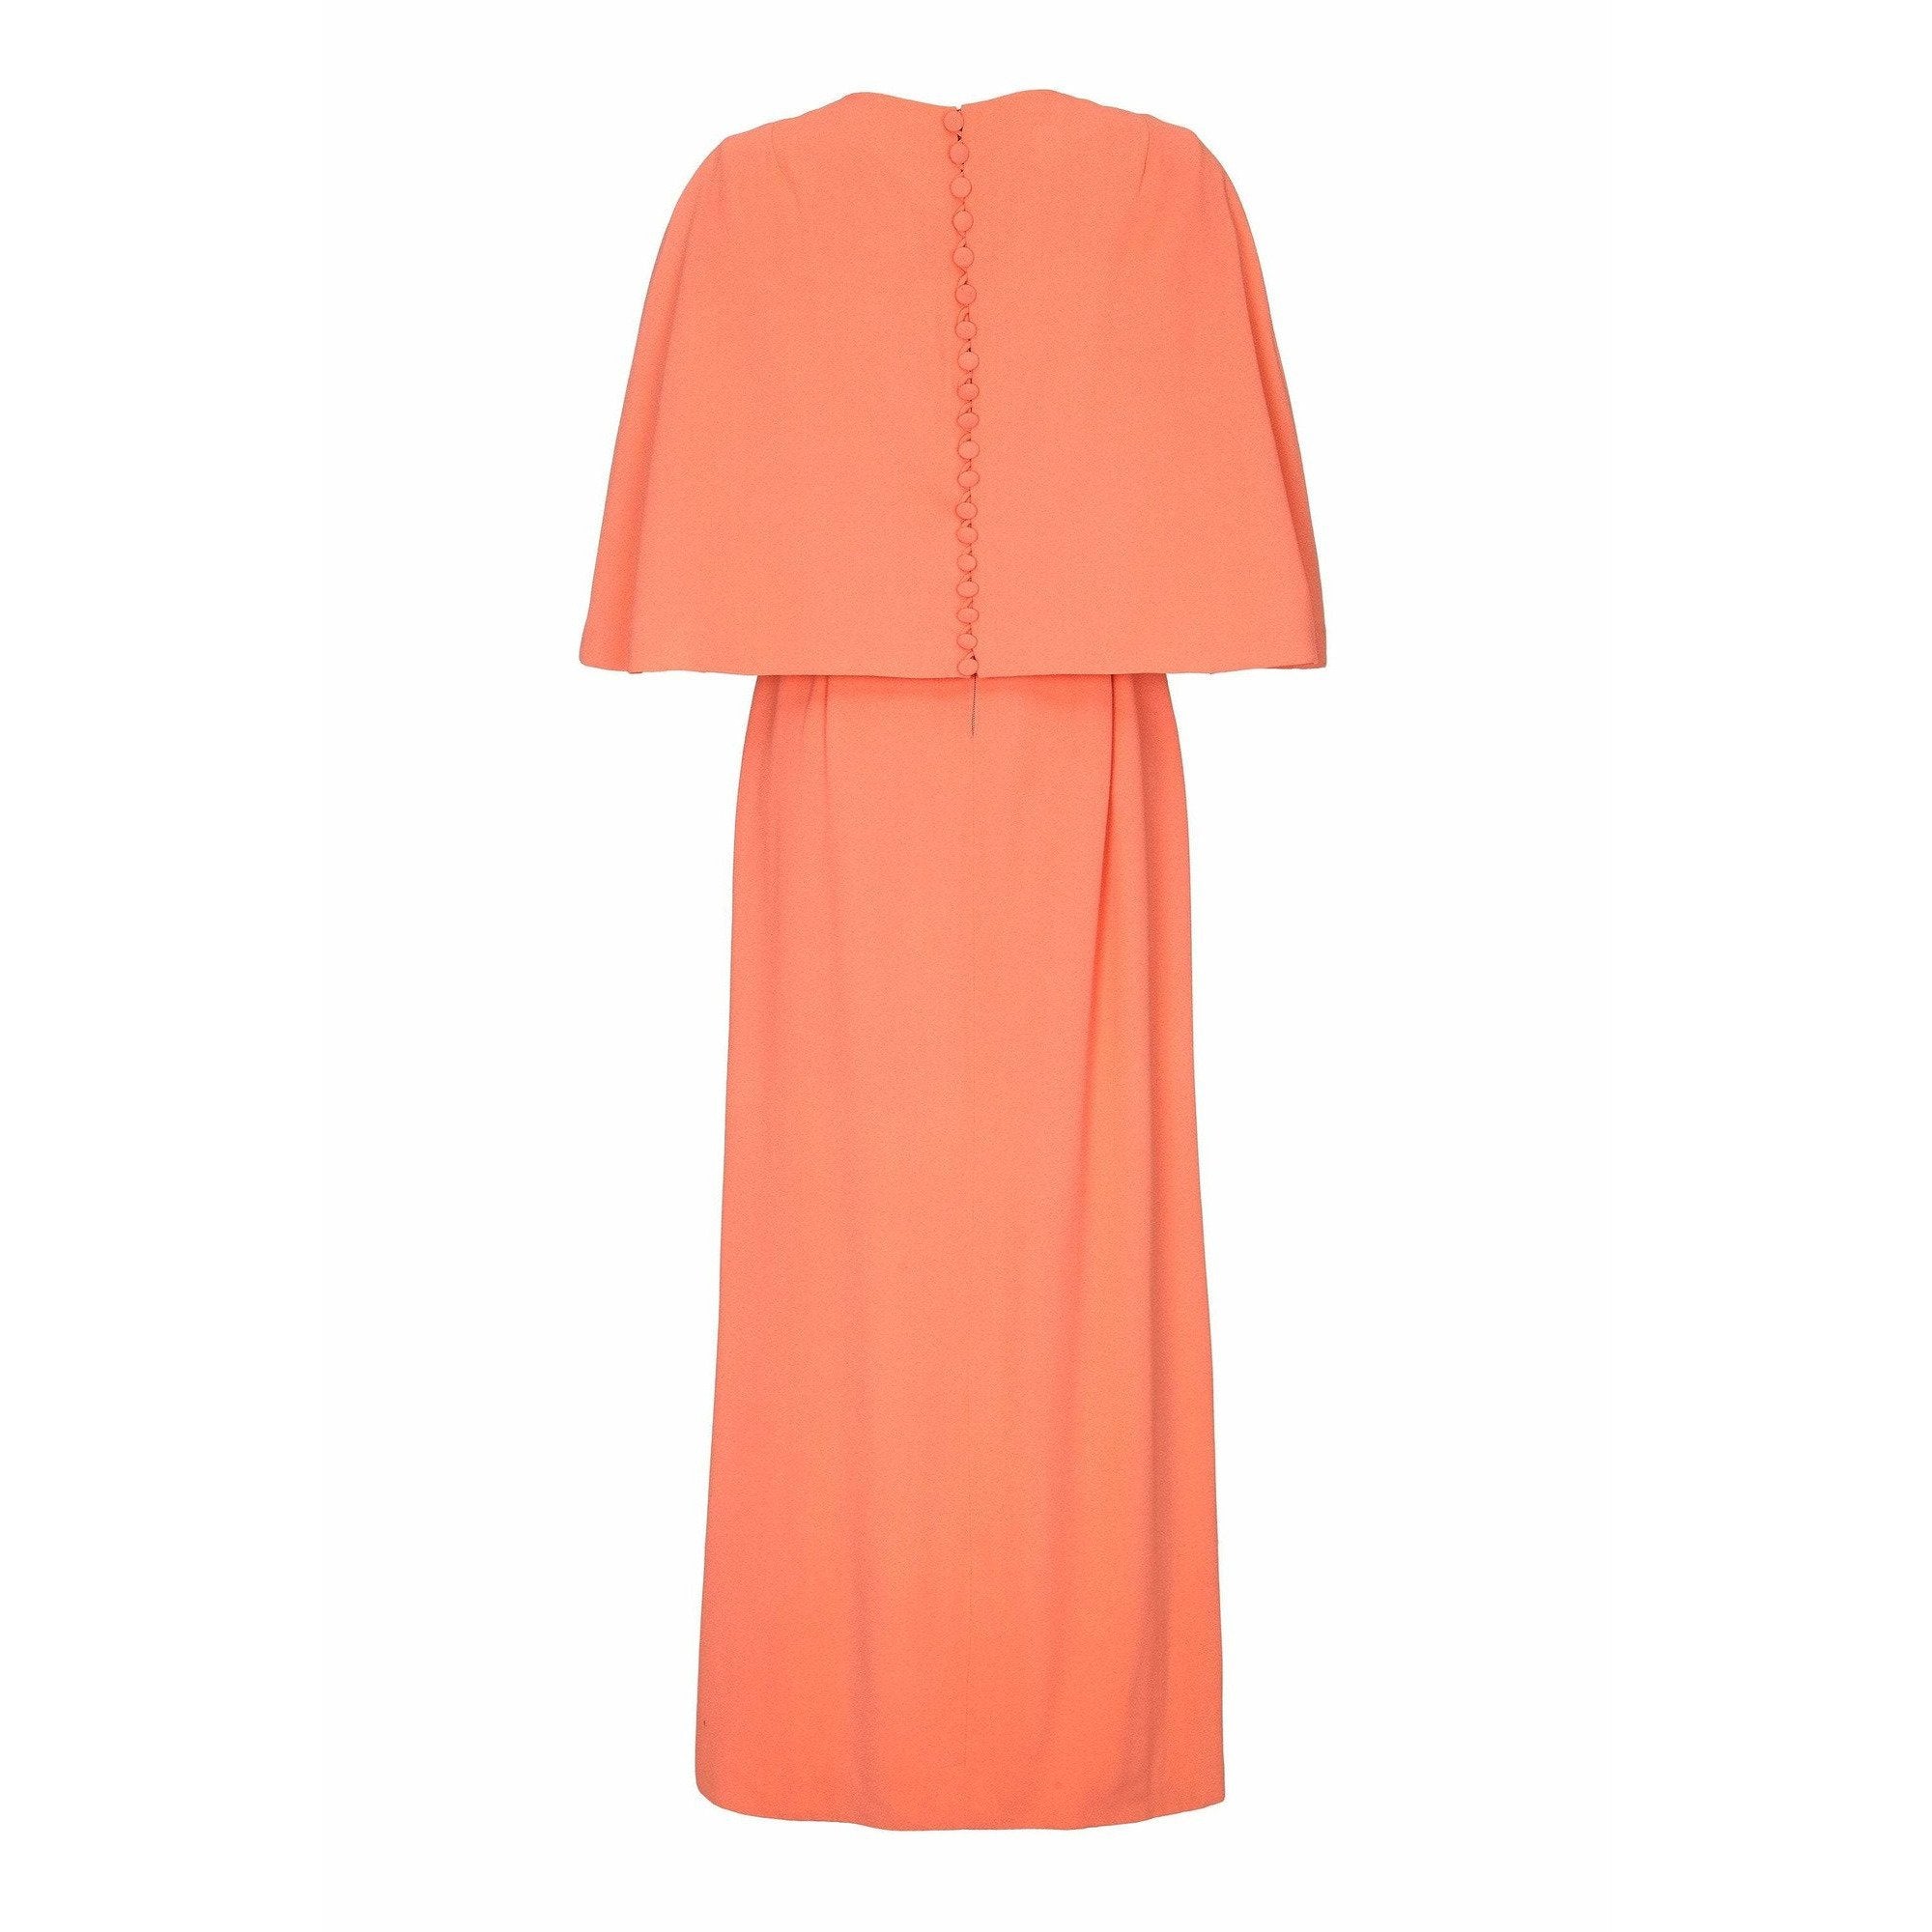 ARCHIVE - Harry B Popper 1960s Peach Maxi Dress with Cape and Jewelled Belt